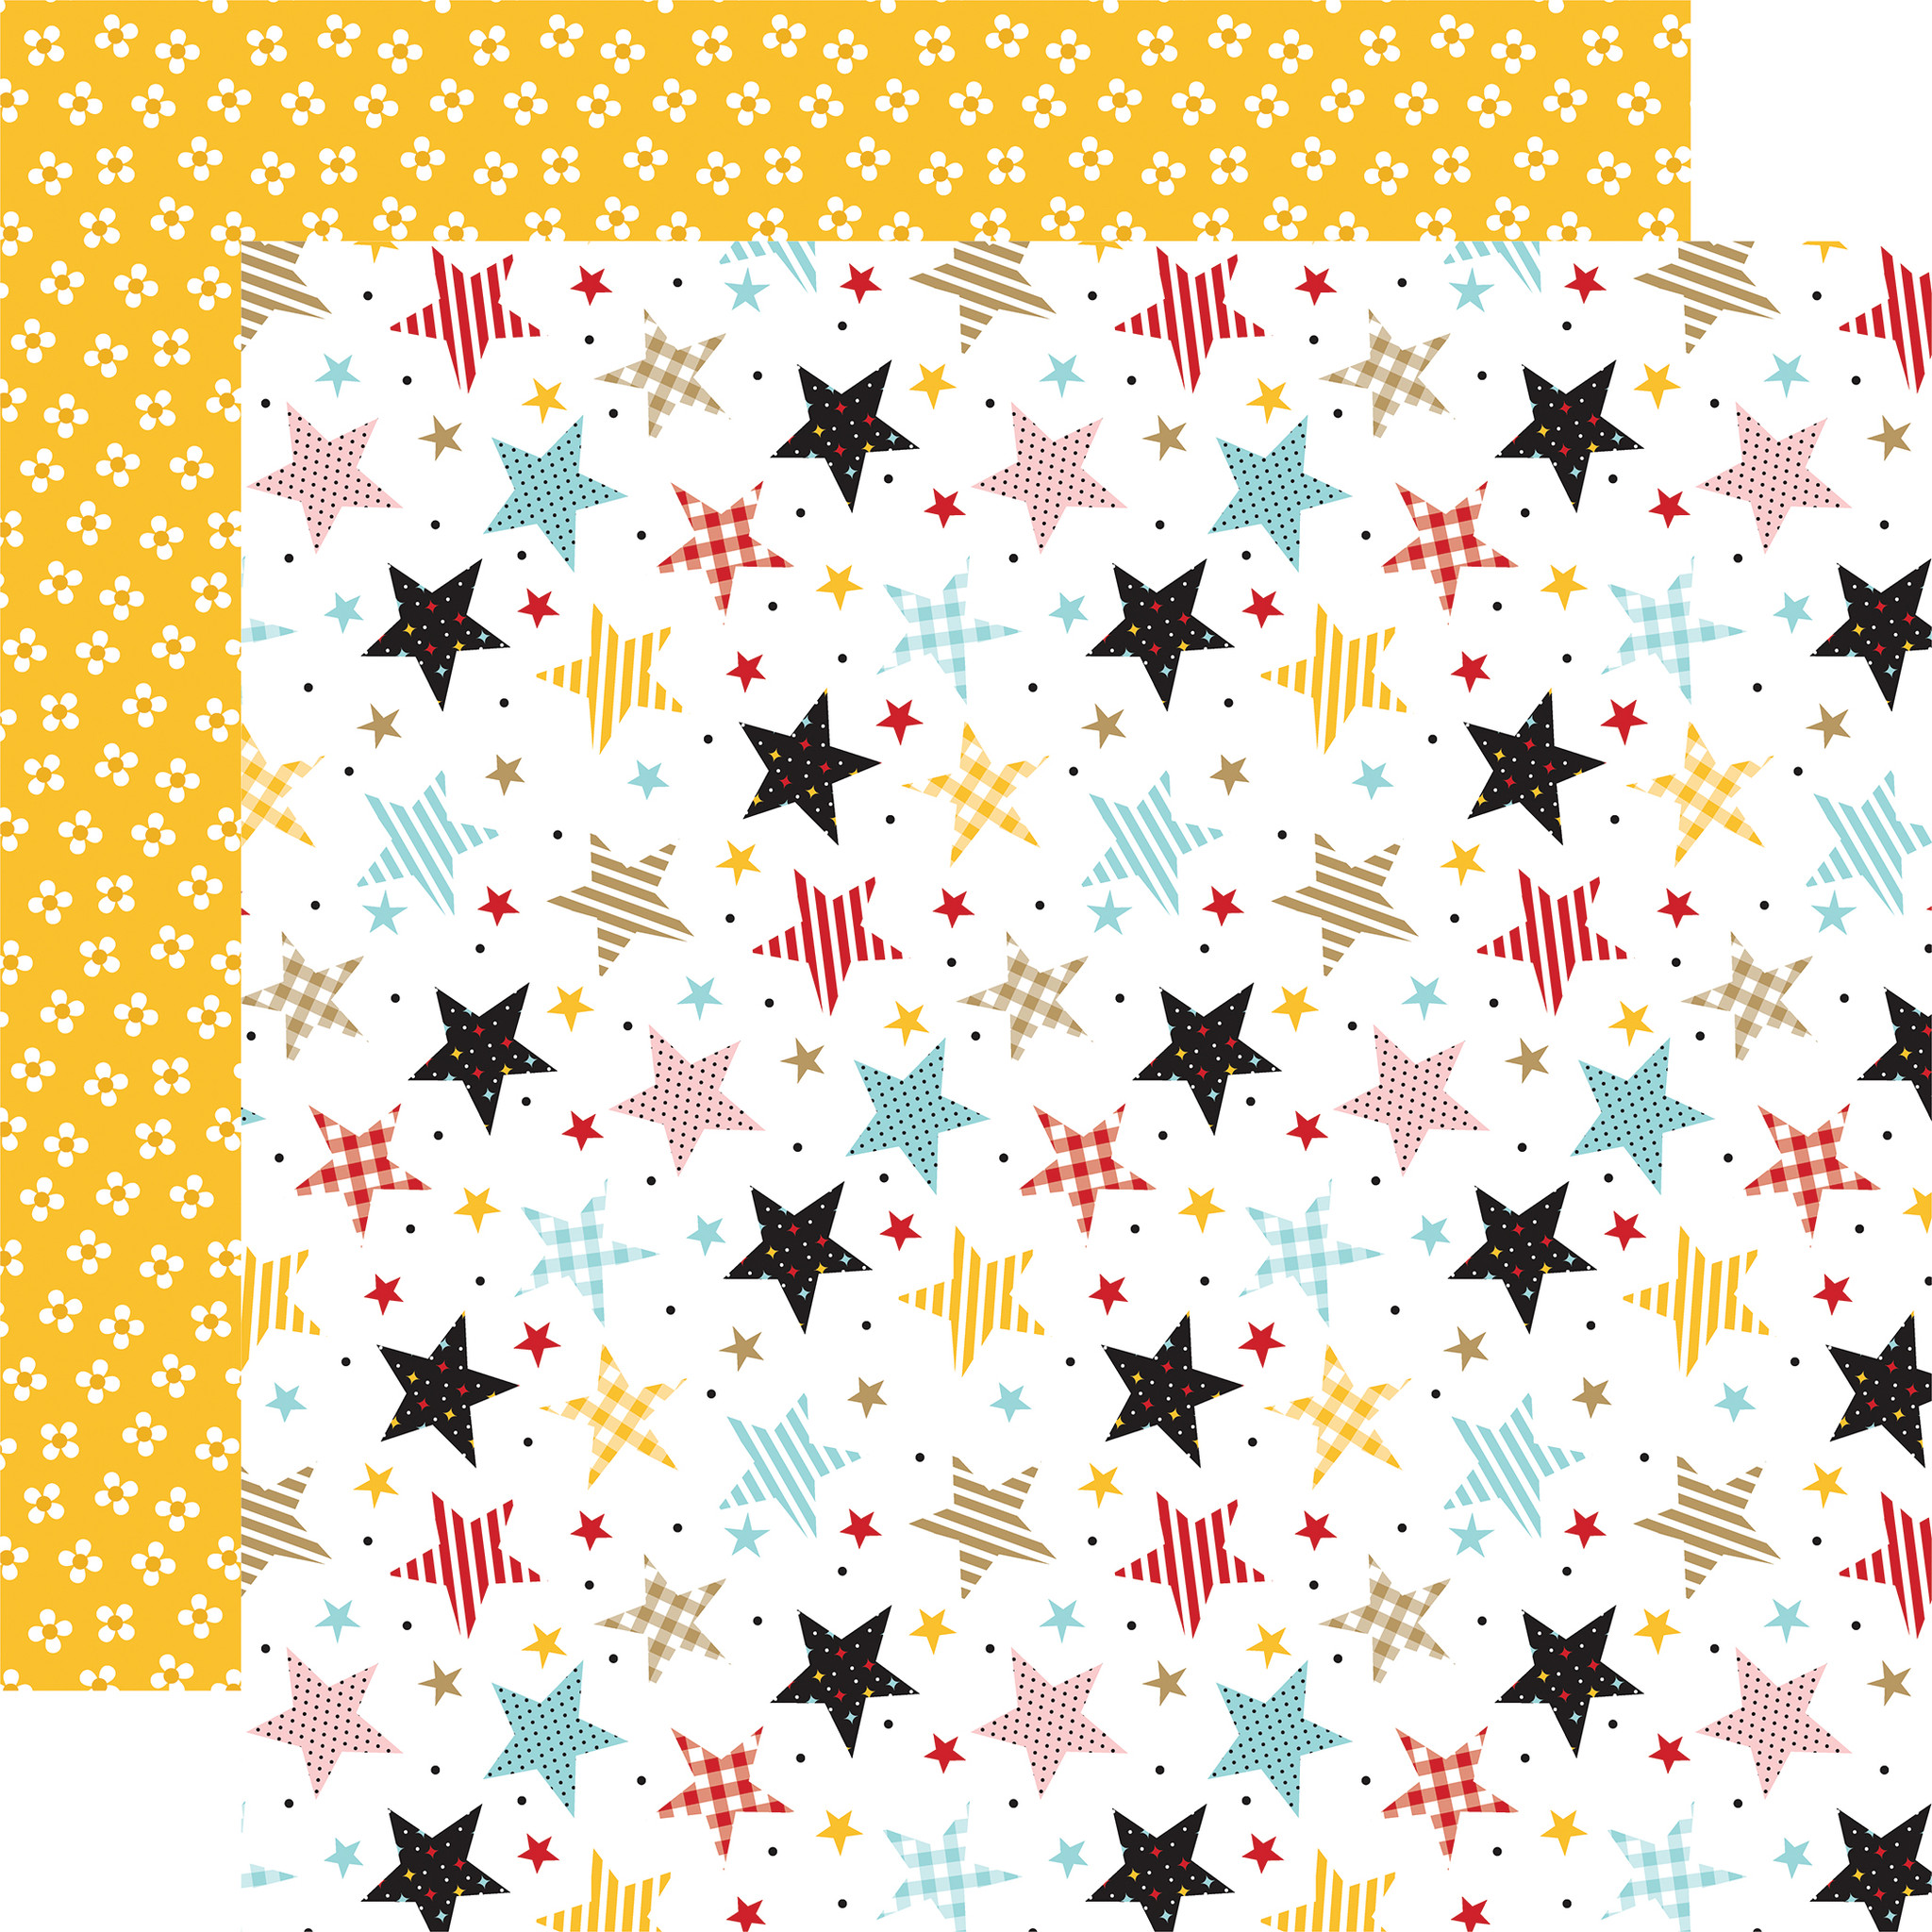 Wish Upon A Star 2: Wish Upon The Stars 12x12 Patterned Paper